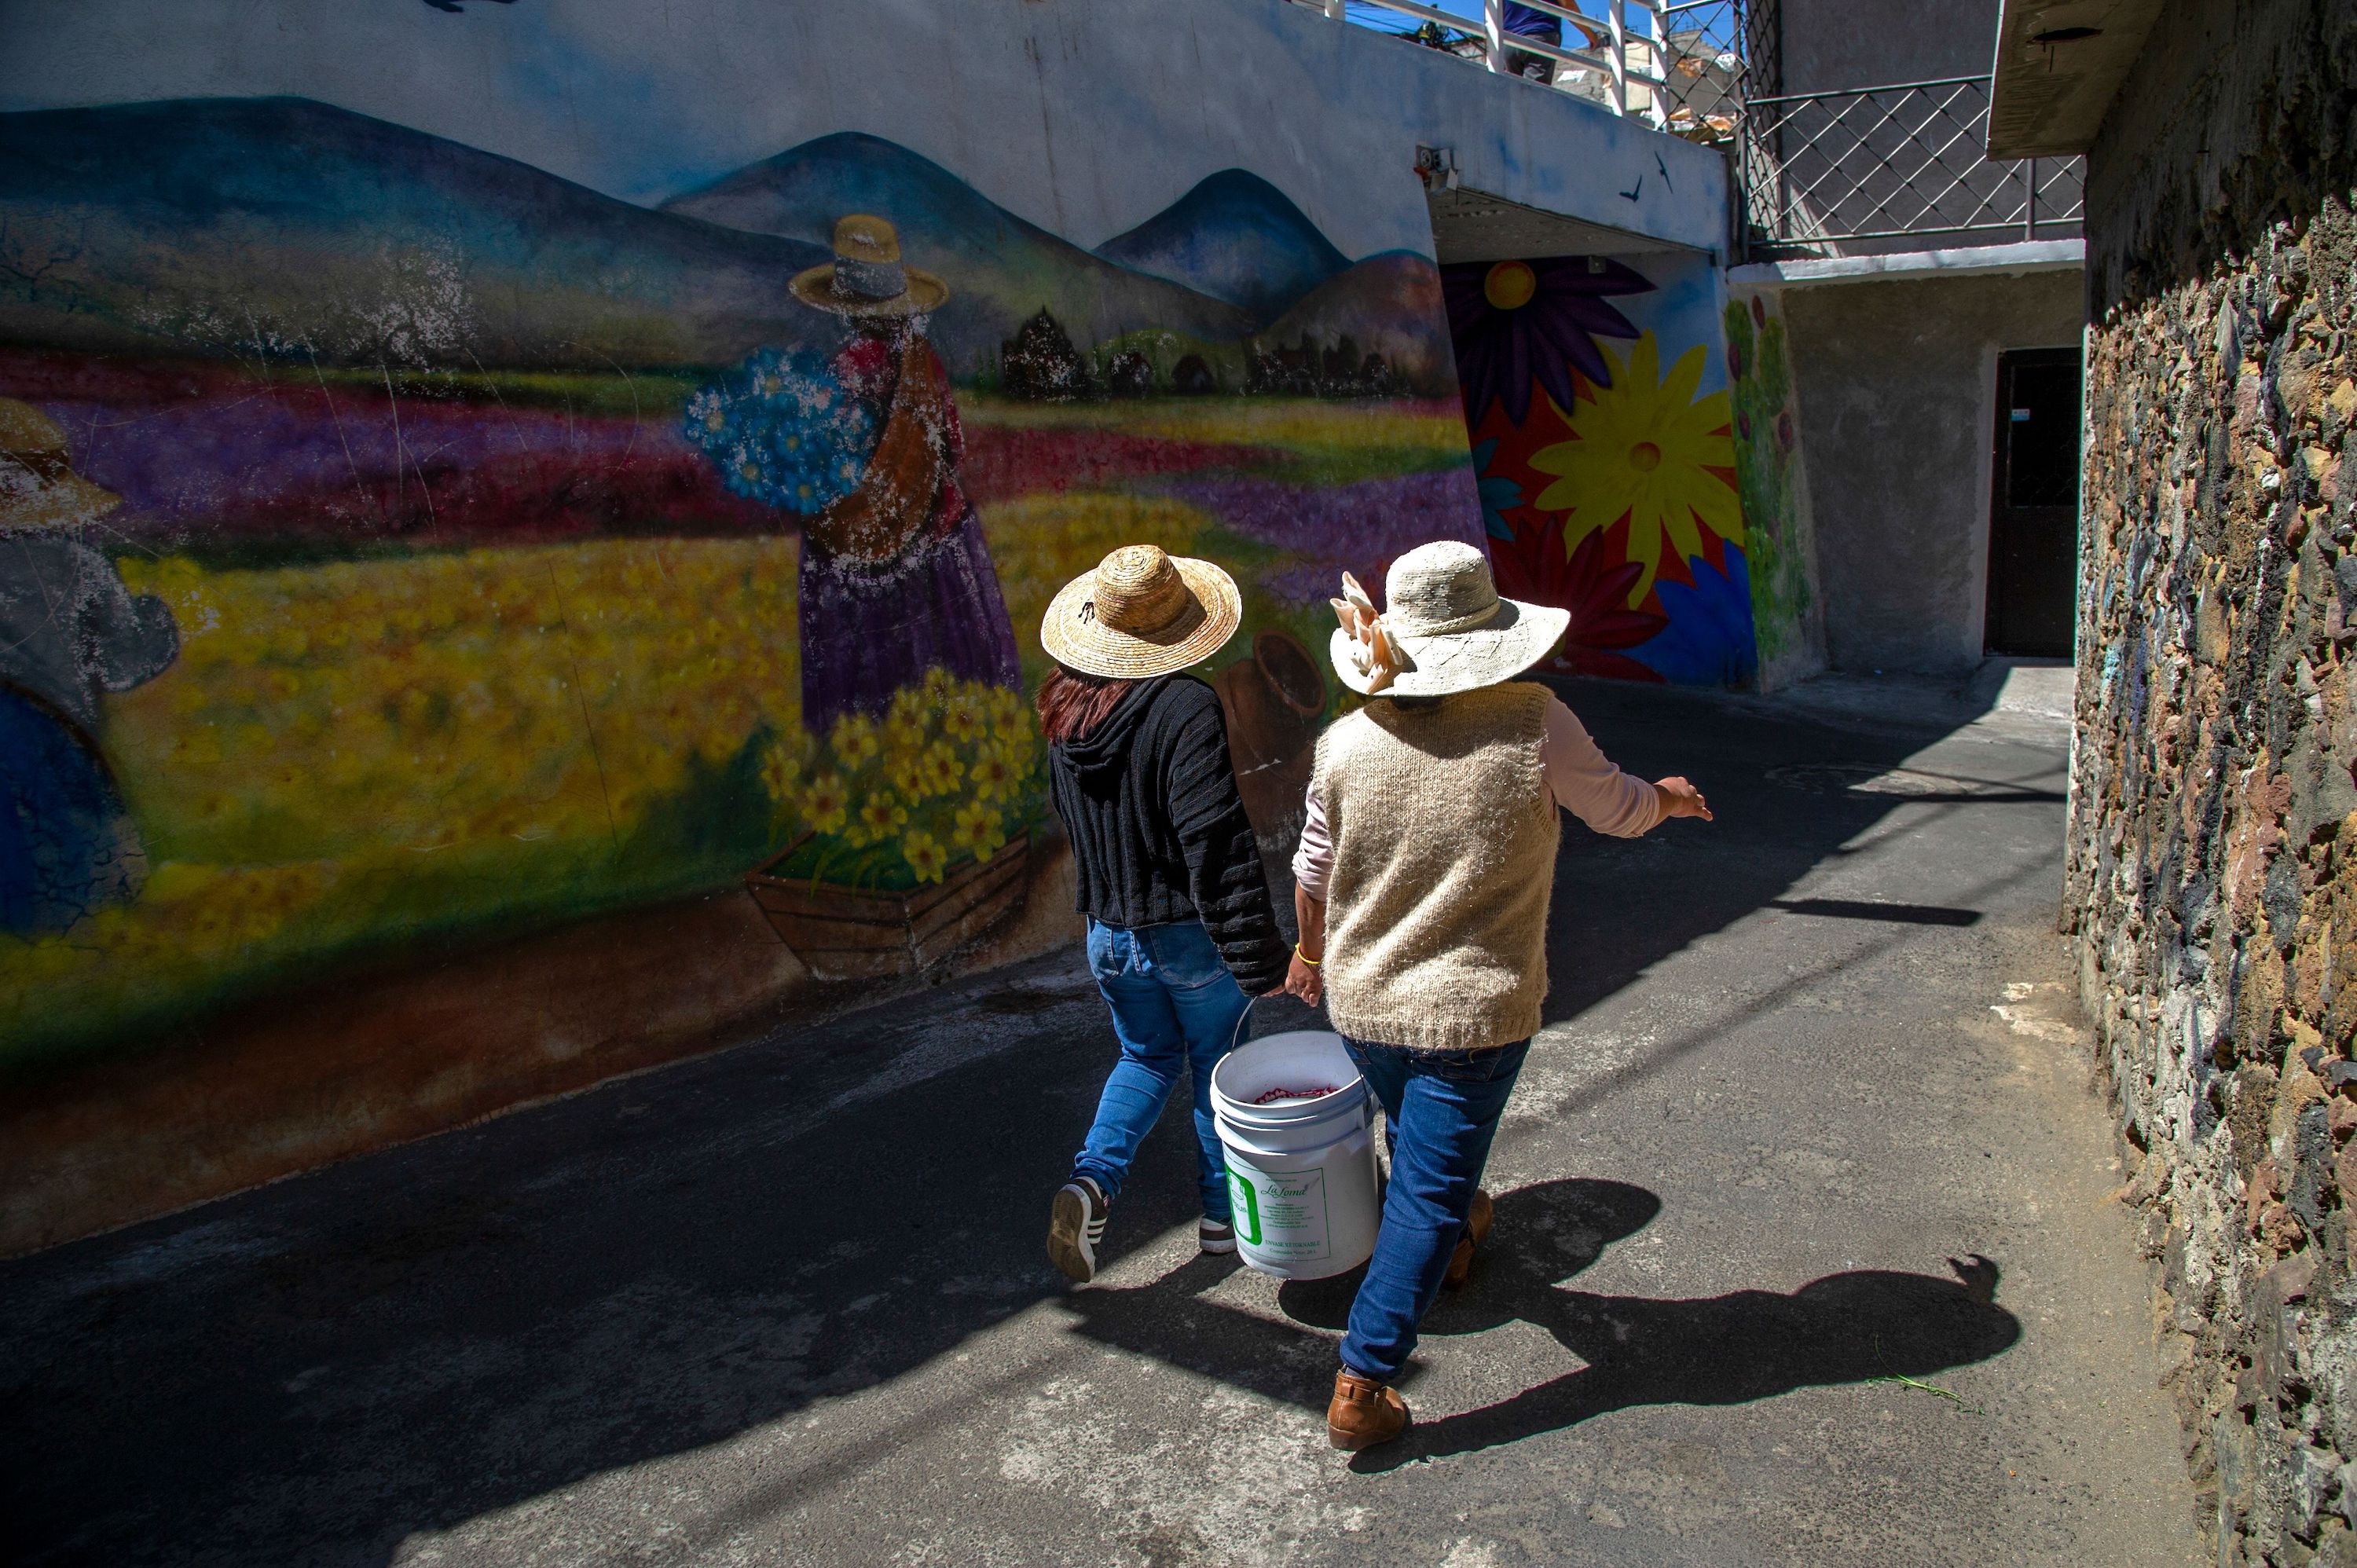 Members of the collective Mujeres de la Tierra, walk with corn to a neighborhood mill, in Milpa Alta, Mexico City, on February 16, 2021. The collective Mujeres de la Tierra started in May, 2020, as a way to help survivors of domestic violence generate an income amid the COVID-19 pandemic.